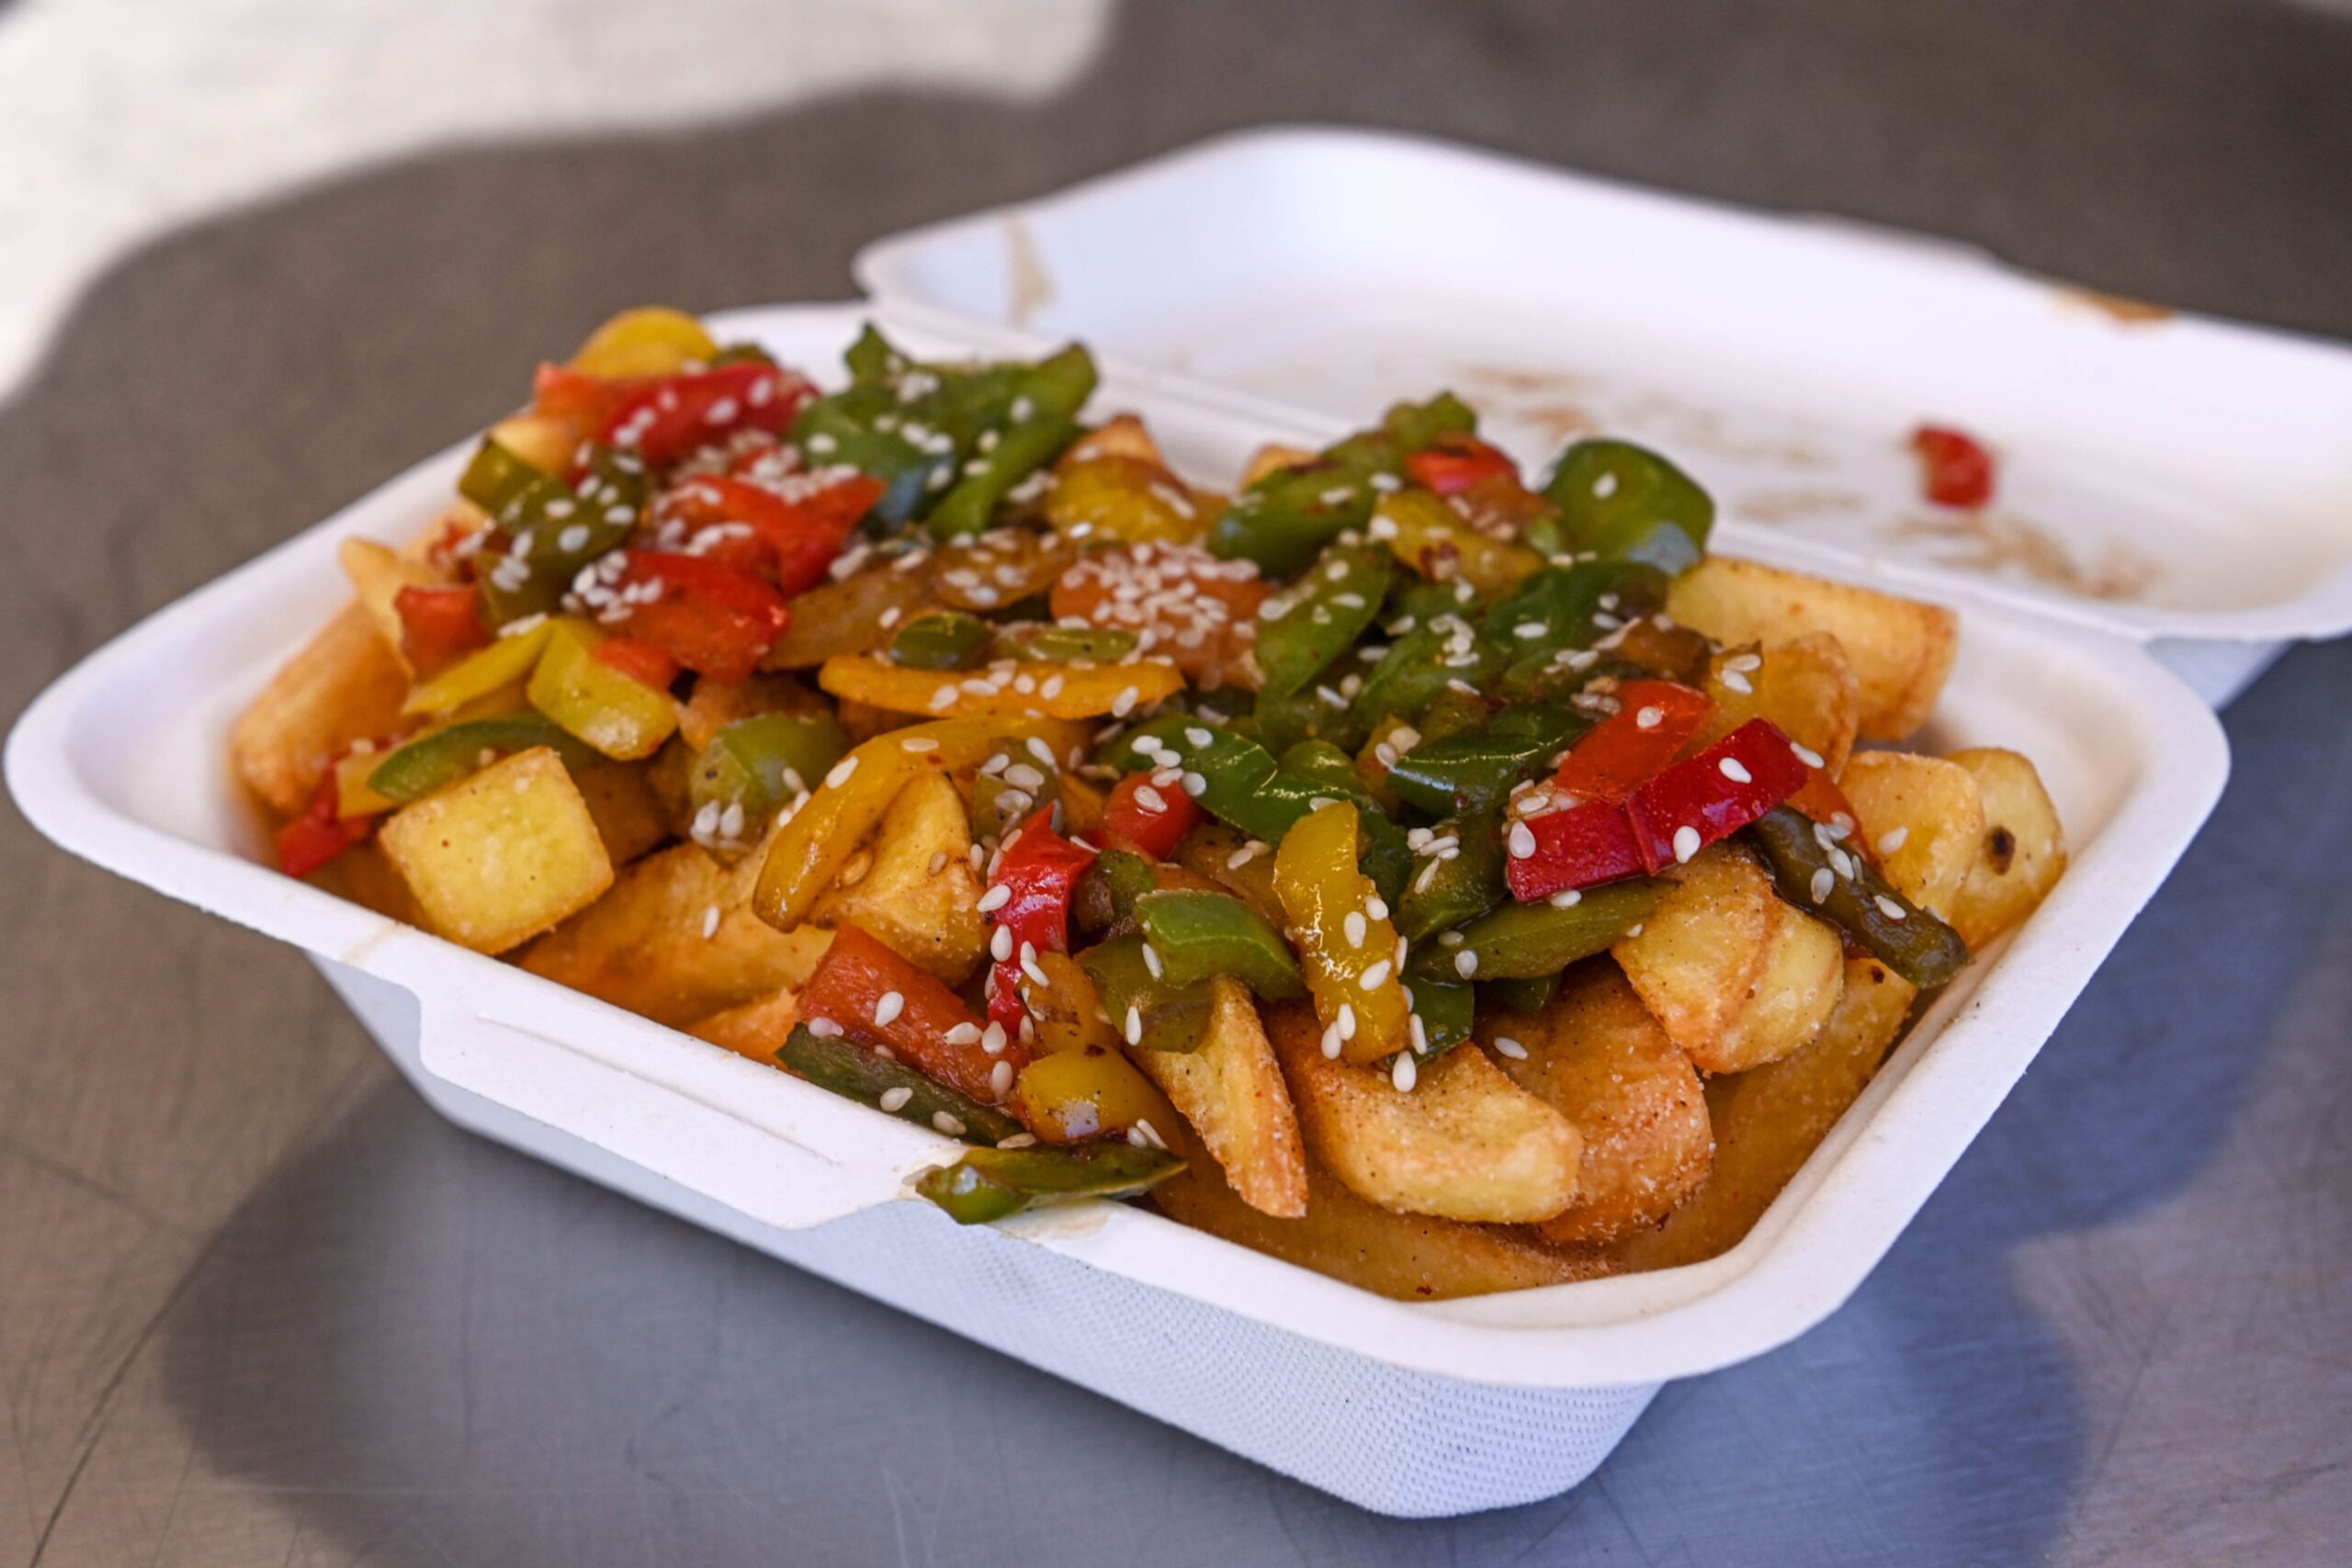 Salt and pepper chips in a takeaway box